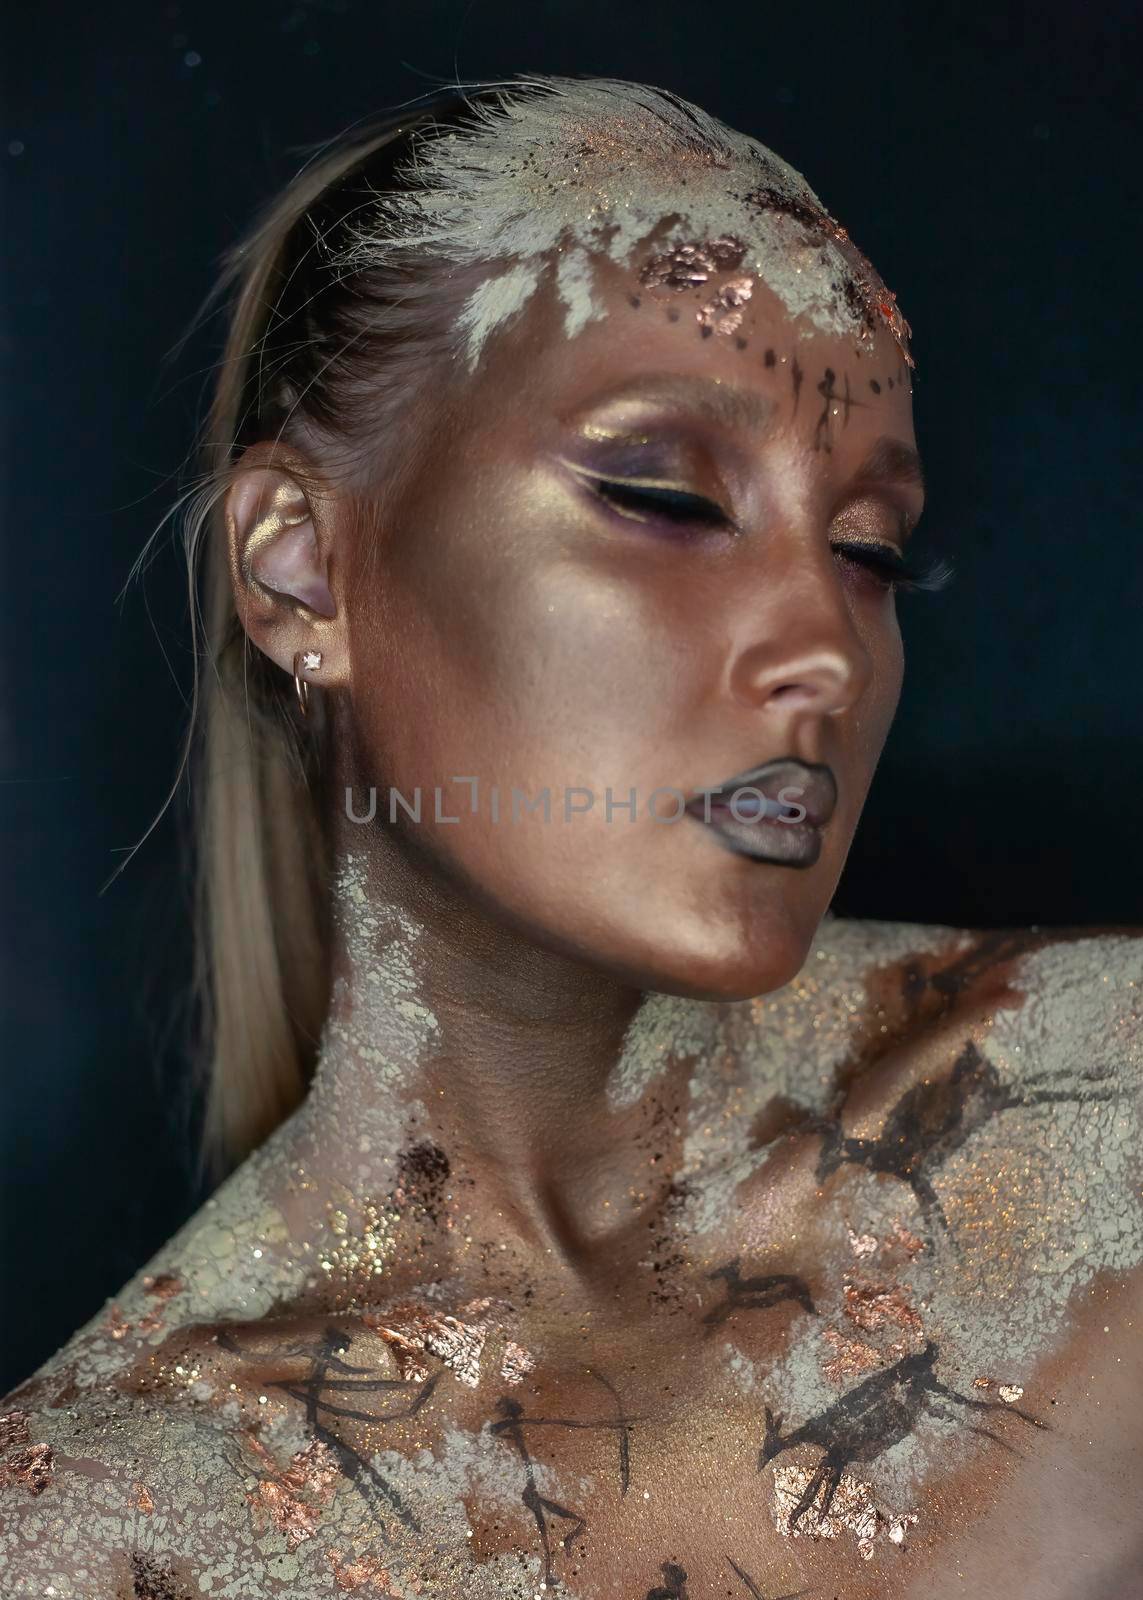 Creative makeup in the style of prehistoric cave painting by Multipedia